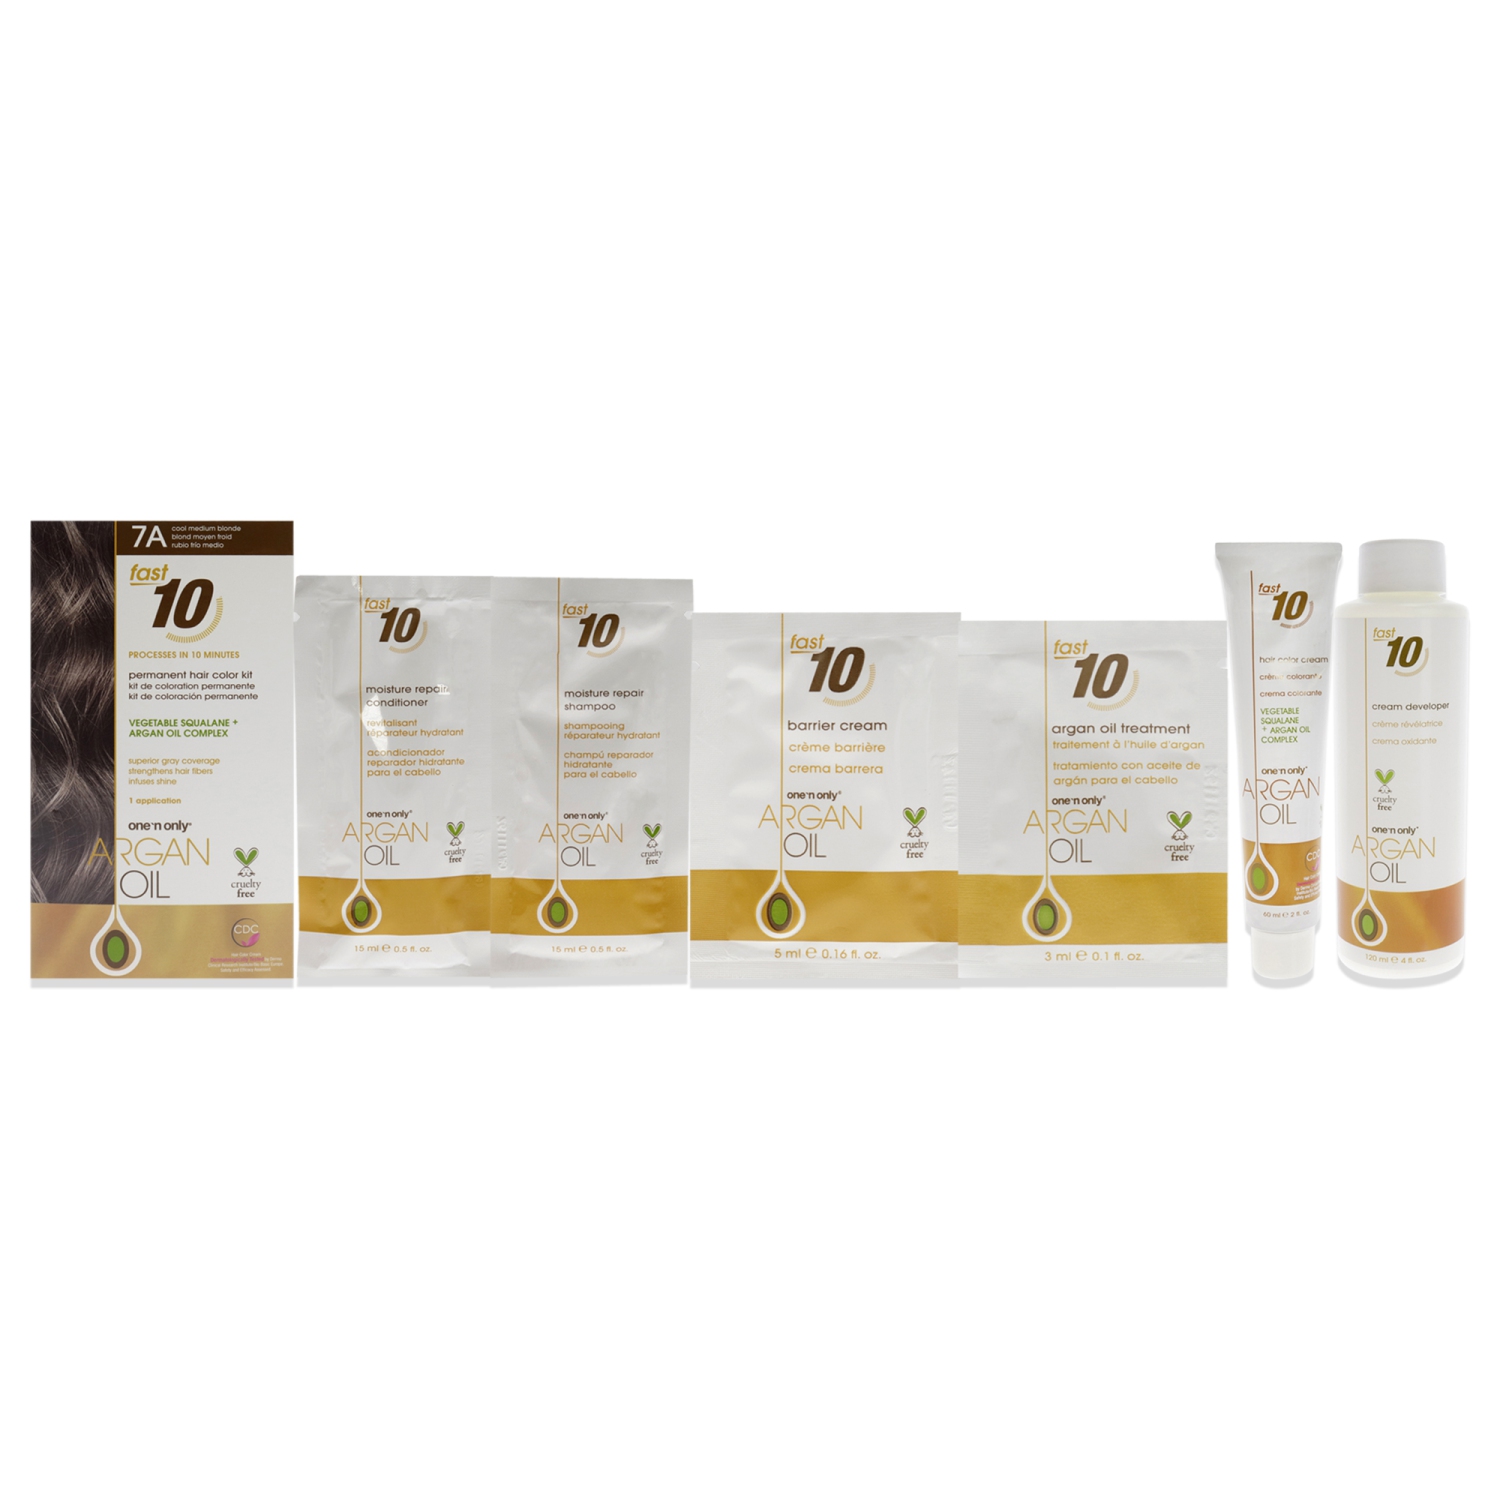 Argan Oil Fast 10 Permanent Hair Color Kit - 7A Cool Medium Blonde by One n Only for Unisex - 1 Pc Hair Color